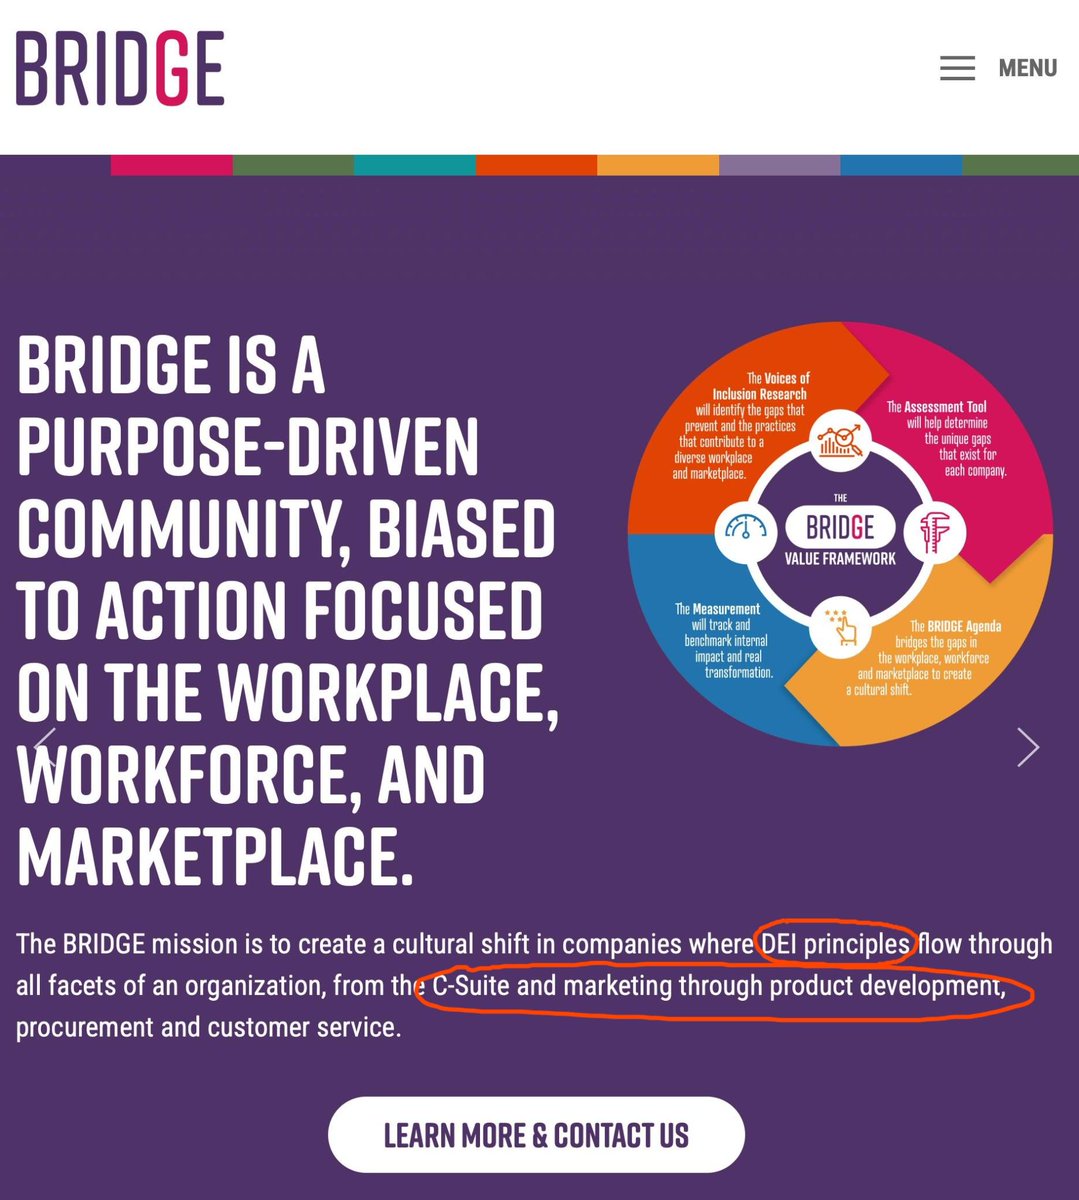 We have destroyed the branding of DEI. Here's a possible rebrand: BRIDGE.